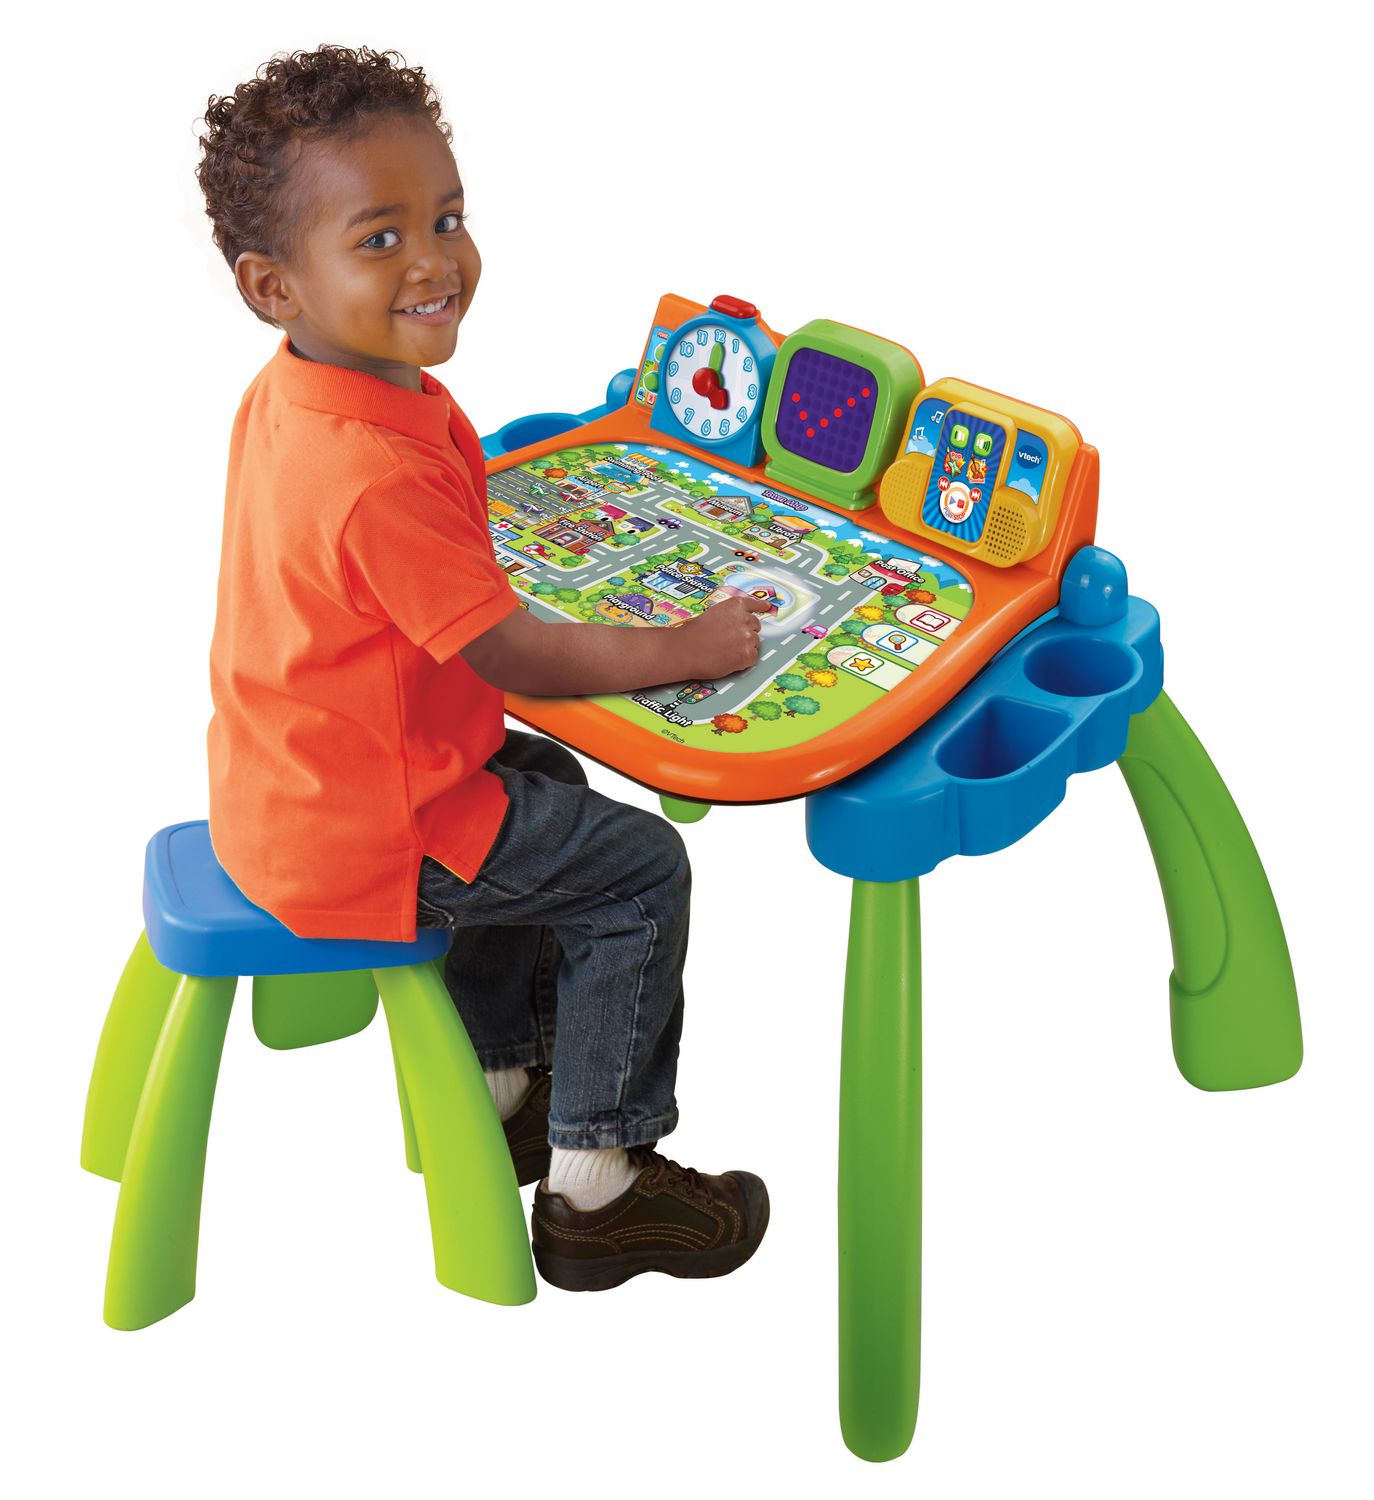 vtech 3 in 1 activity table